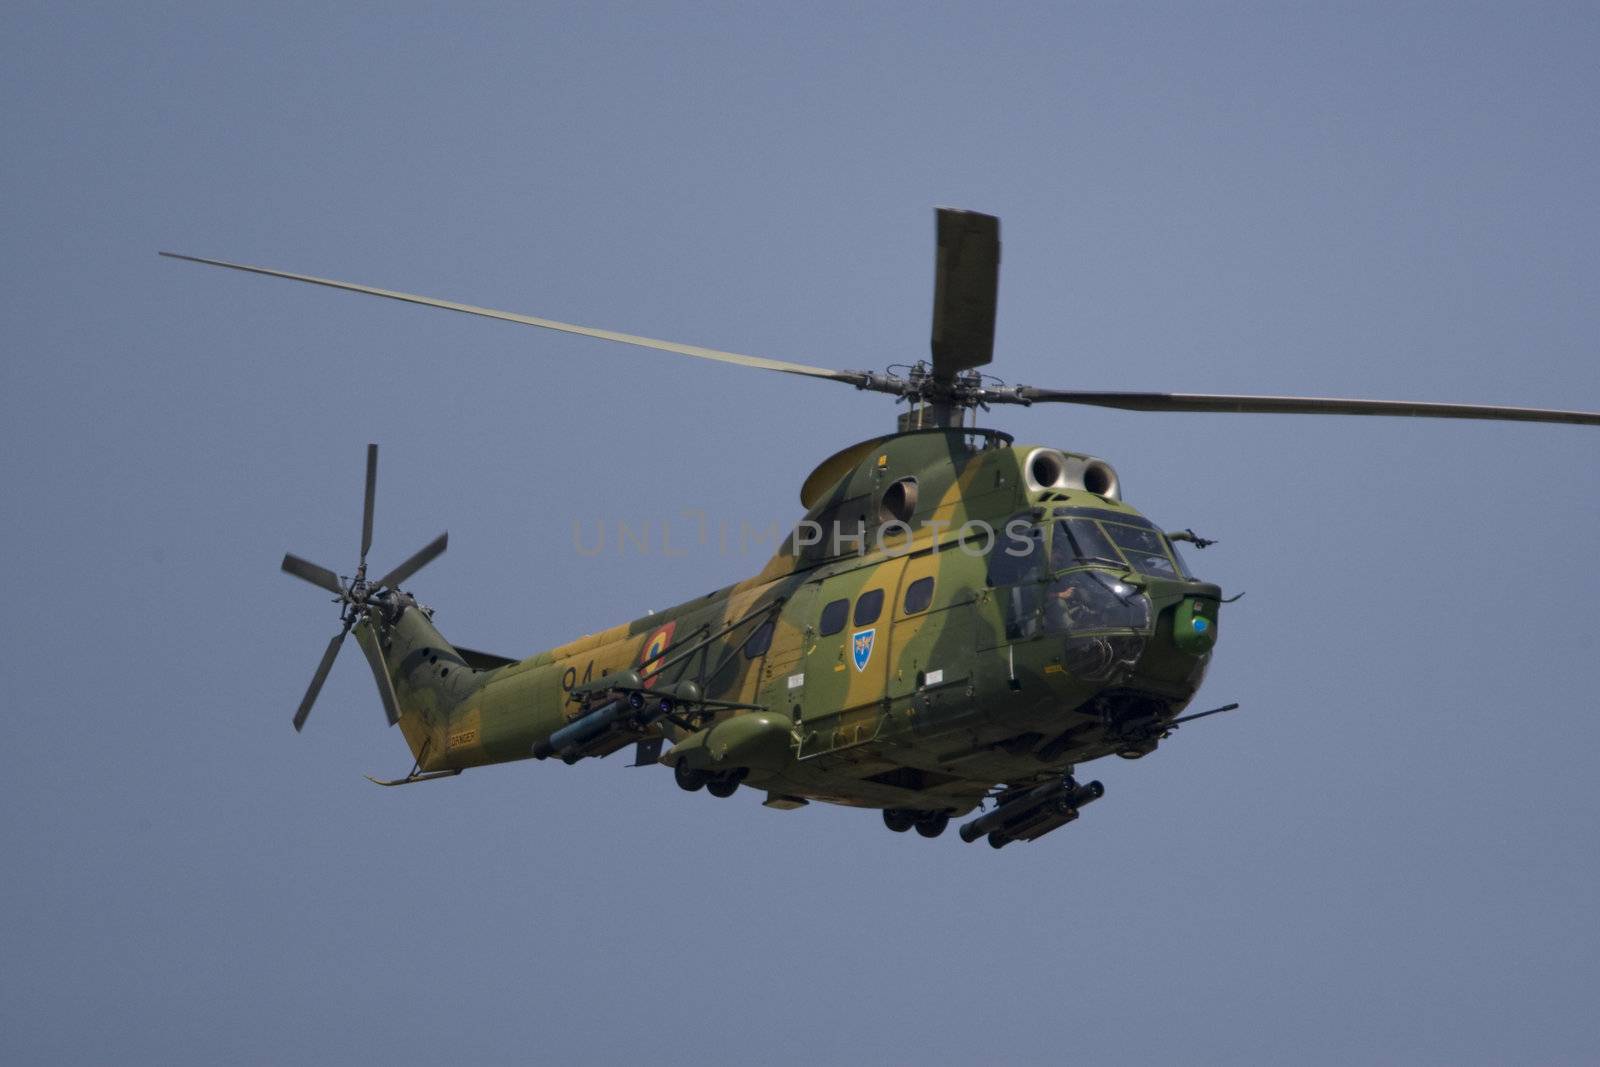 Helicopter performing during airshow by MihaiDancaescu